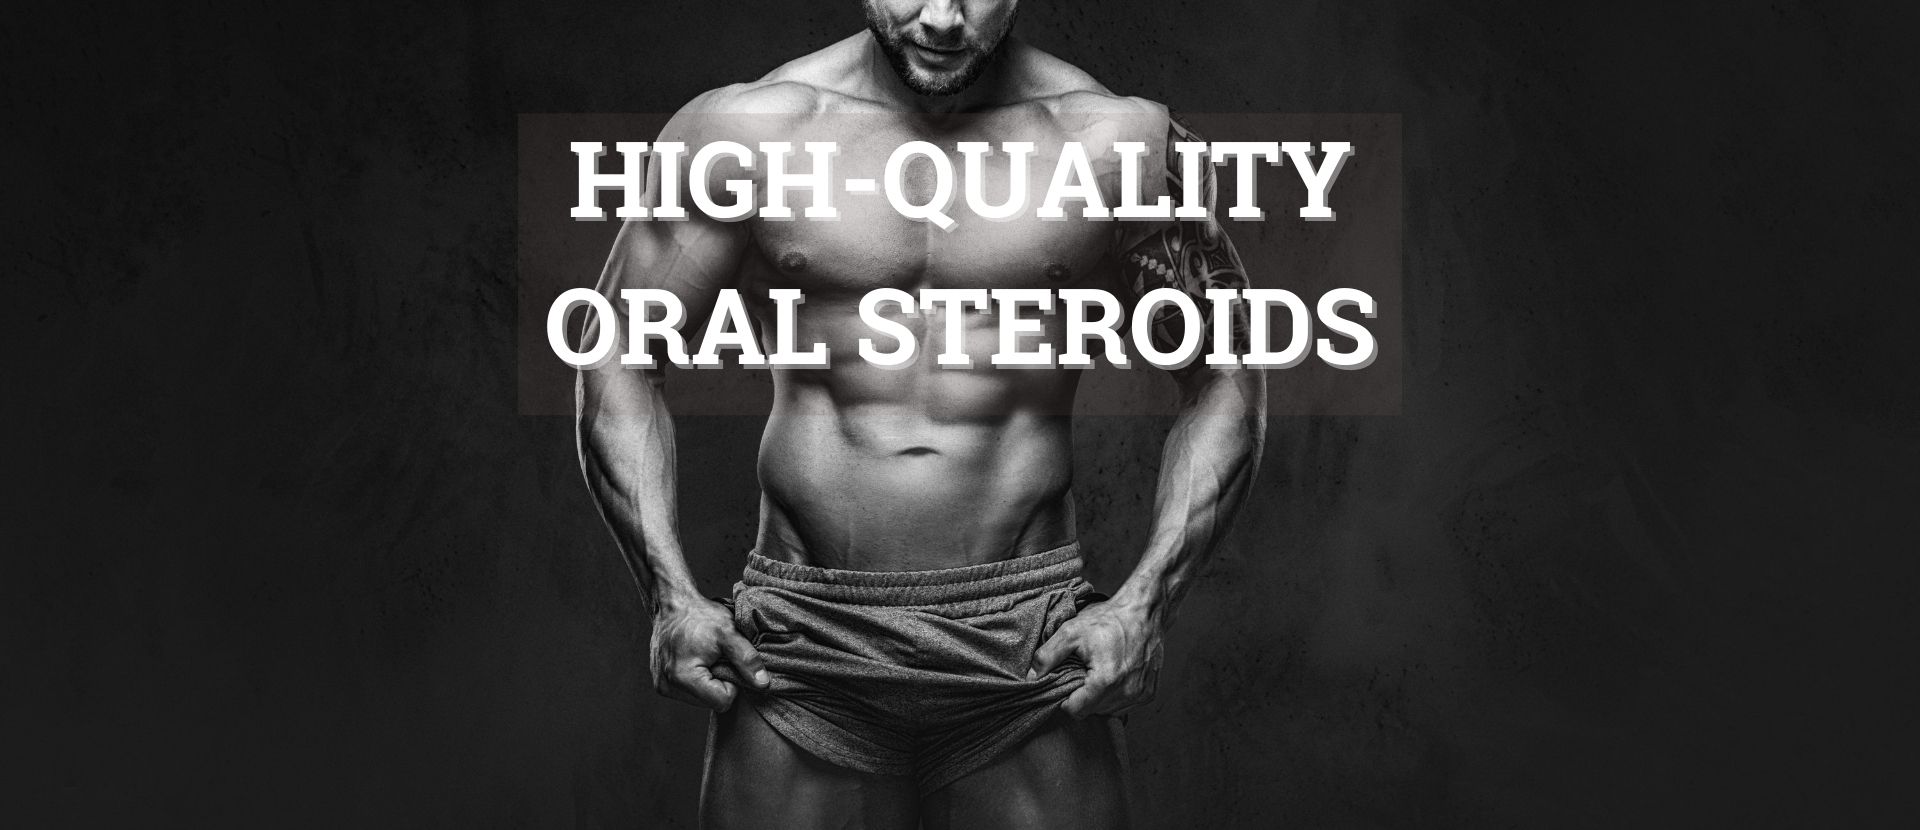 10 Shortcuts For buy testosterone boosters online That Gets Your Result In Record Time